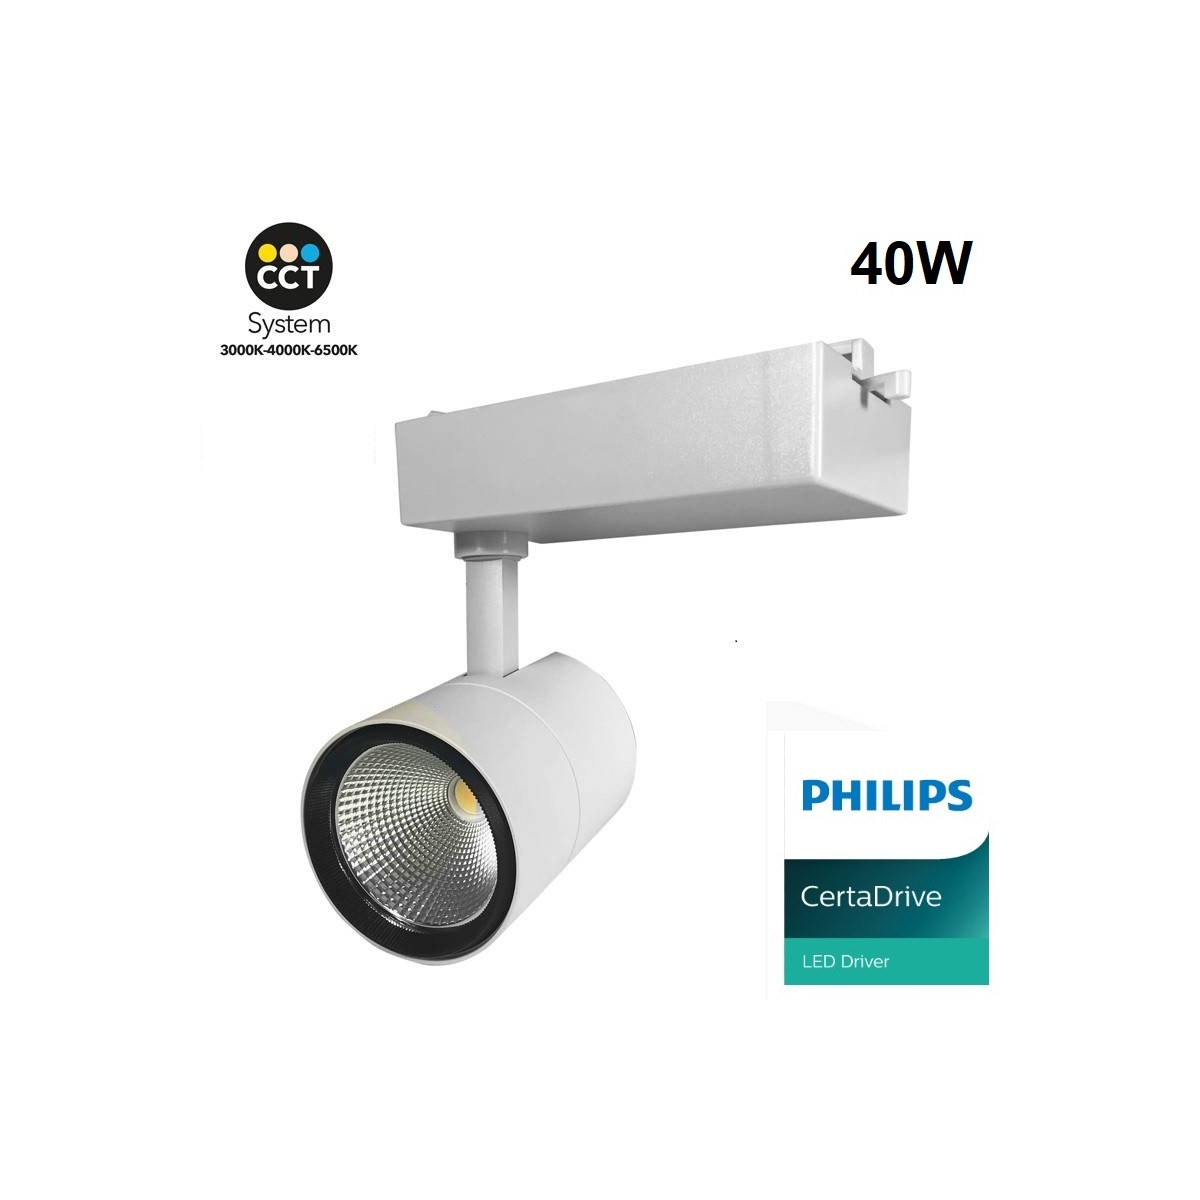 CCT 40W single-phase LED track spotlight - PHILIPS Driver - 3600lm